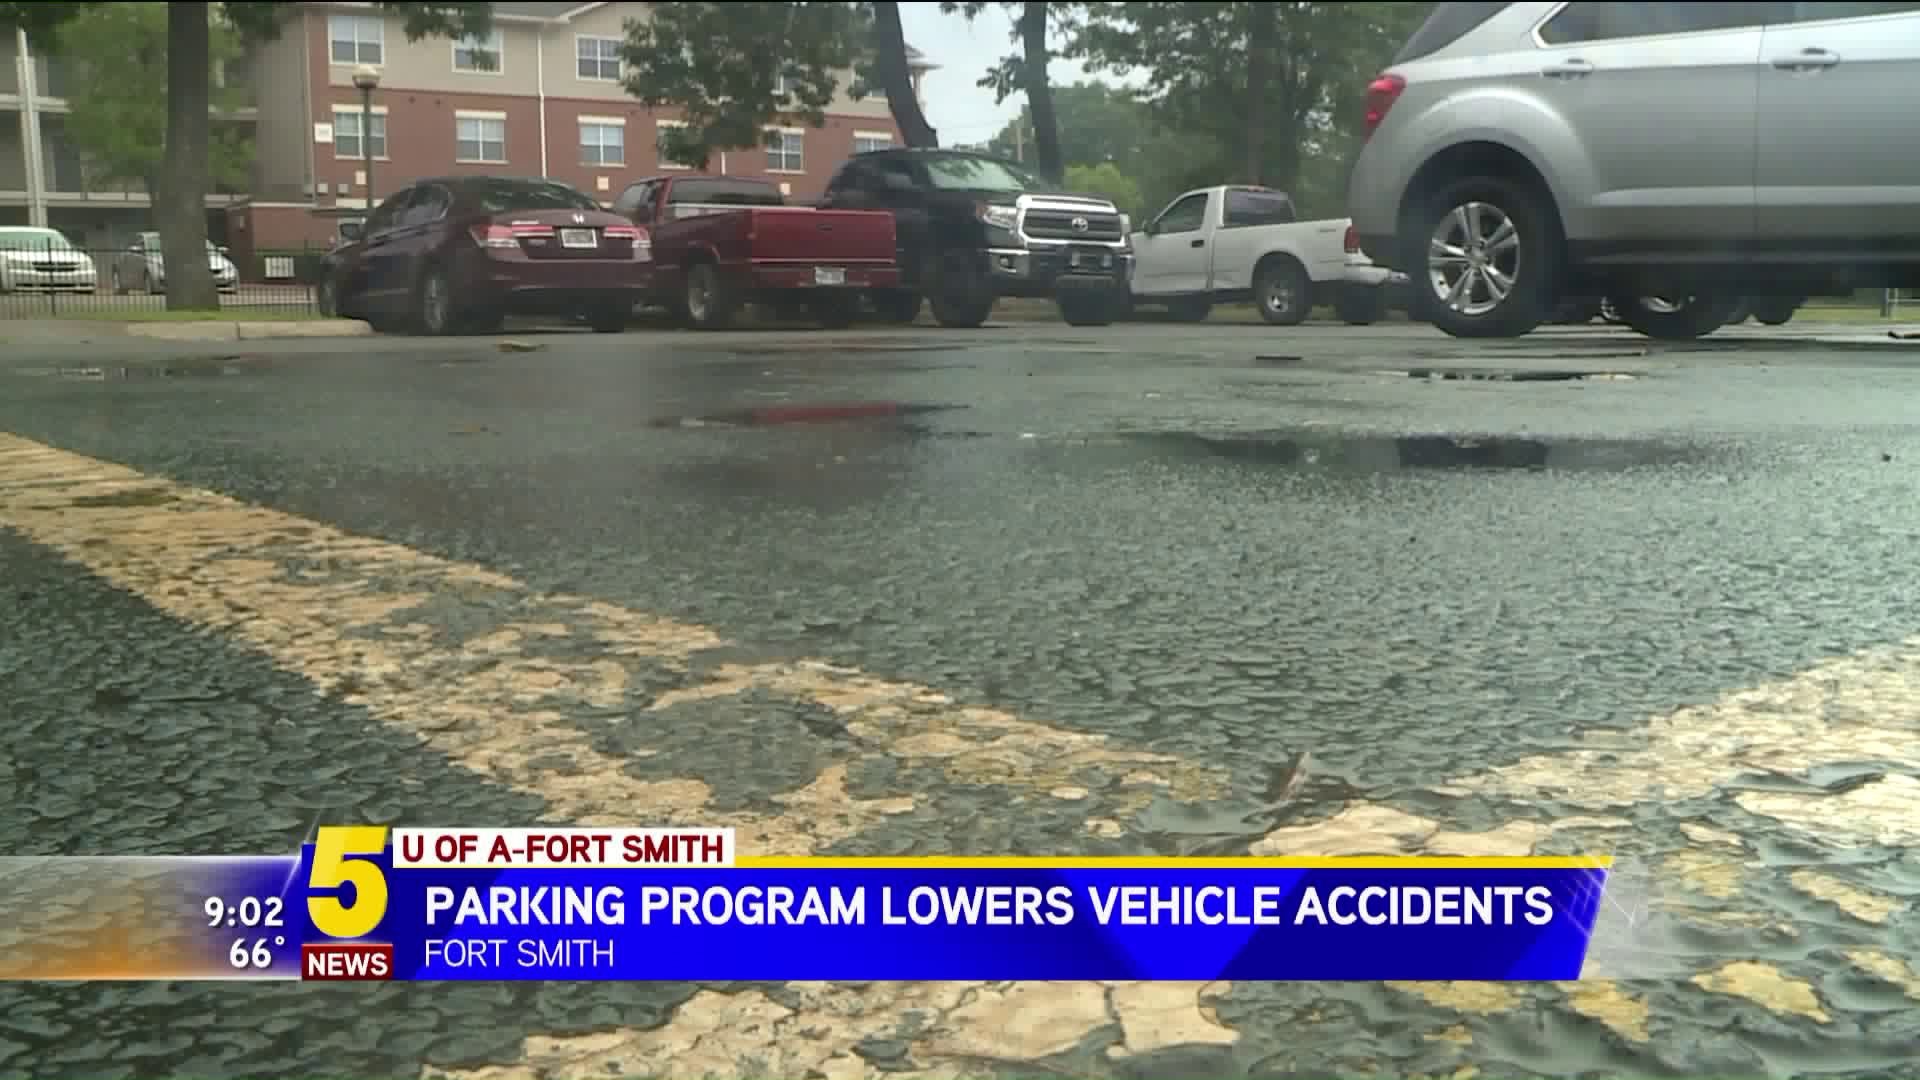 Parking Program Lowers Vehicle Accidents